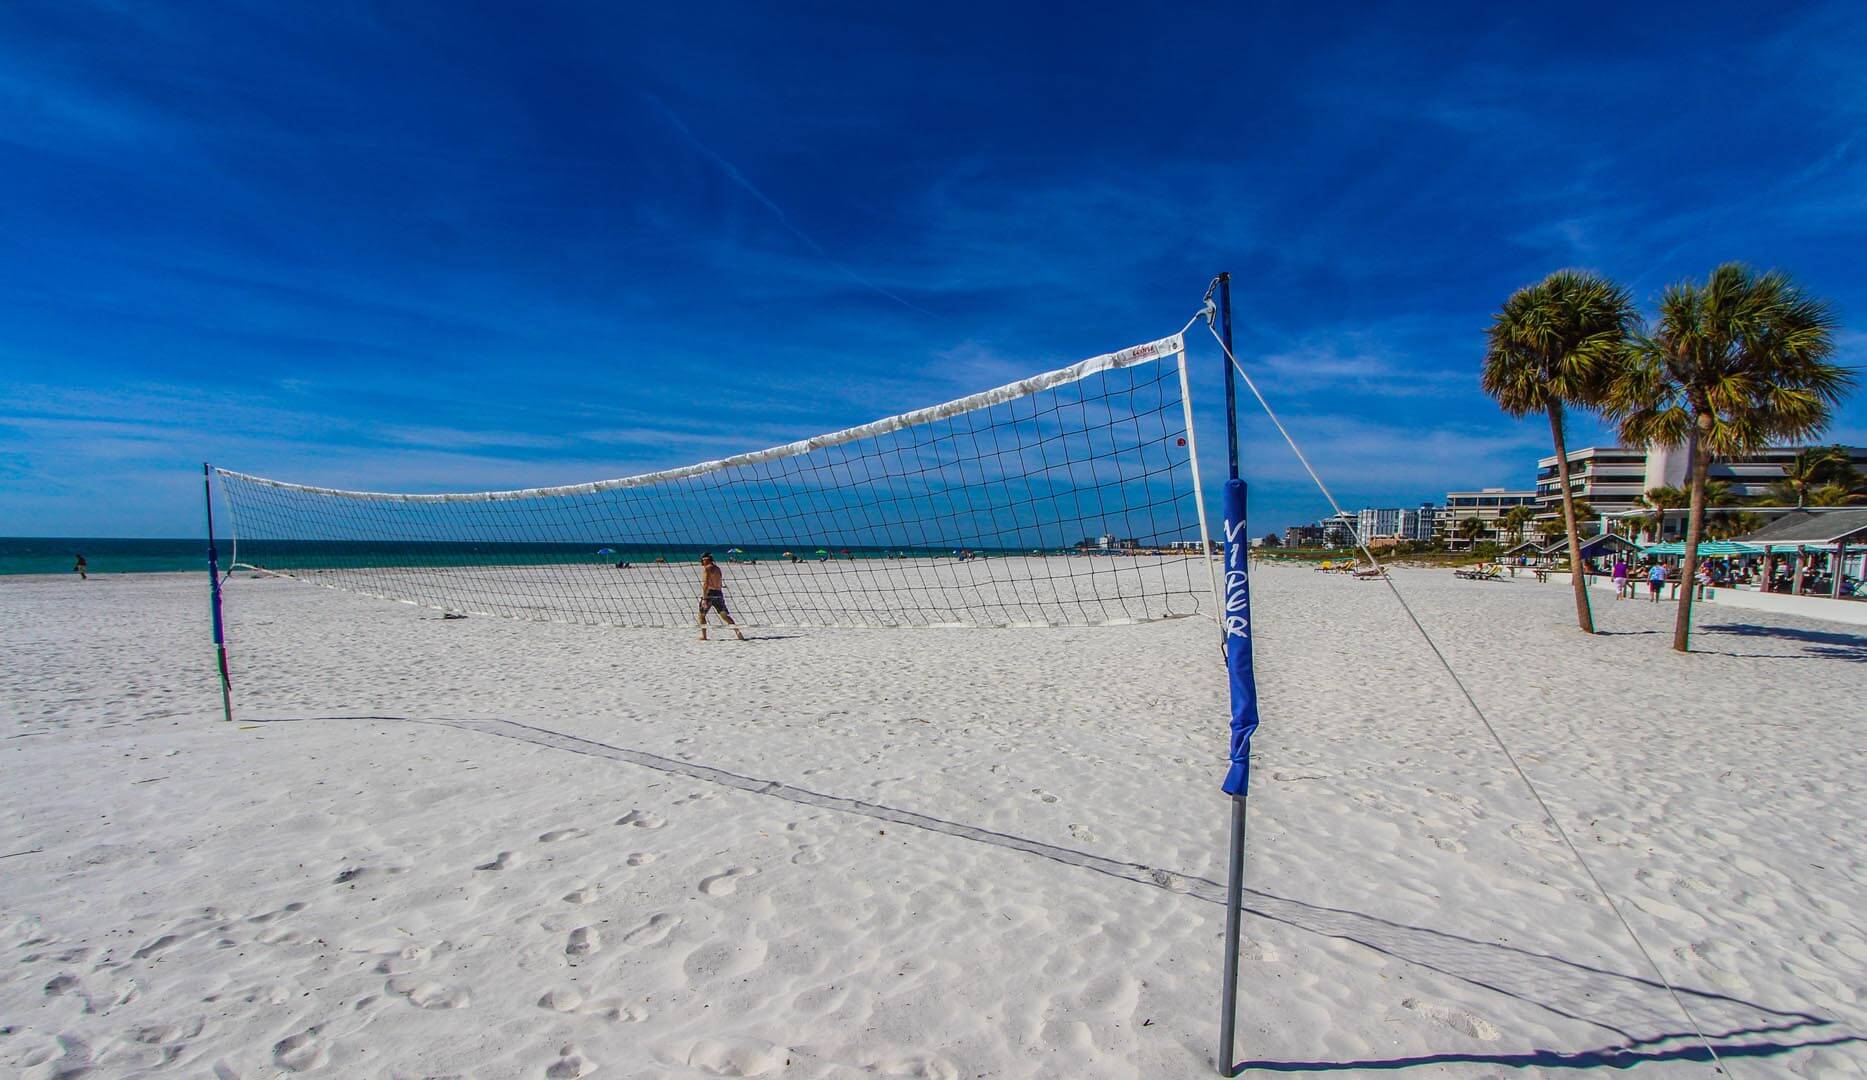 Volleyball courts on the beach at VRI's Mariner Beach Club in St. Pete Beach, Florida.